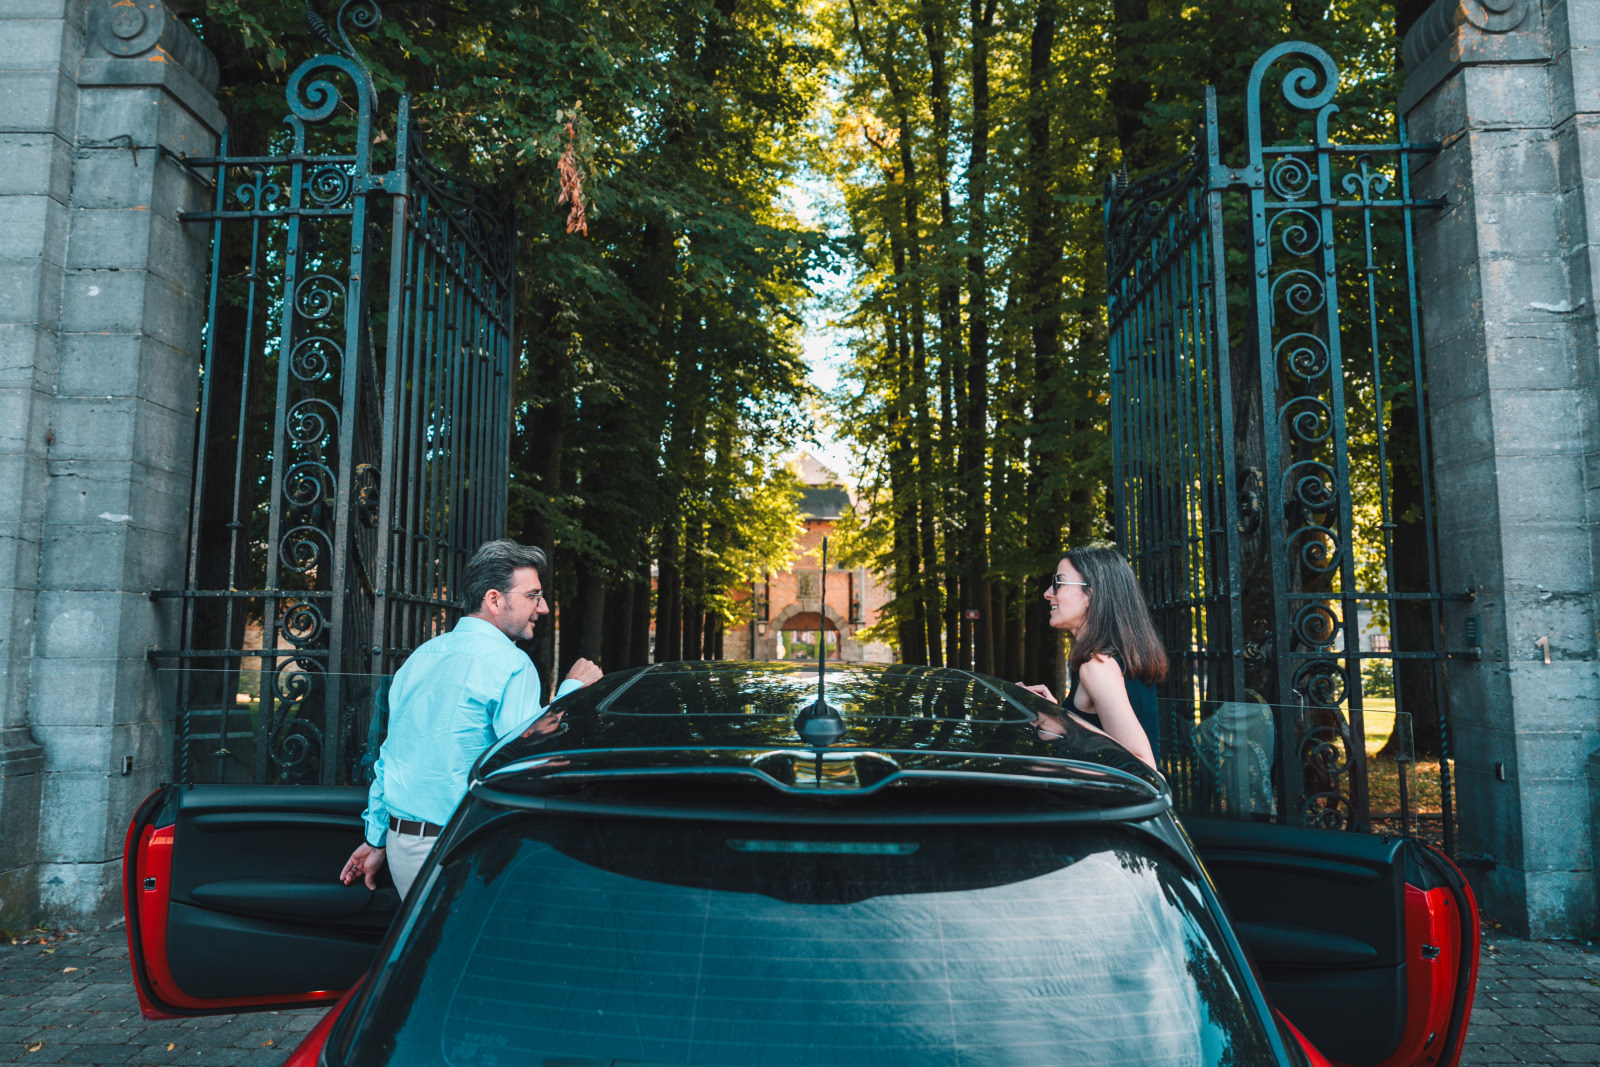 A couple in their car in front of the entrance gates of the Bioul Castle